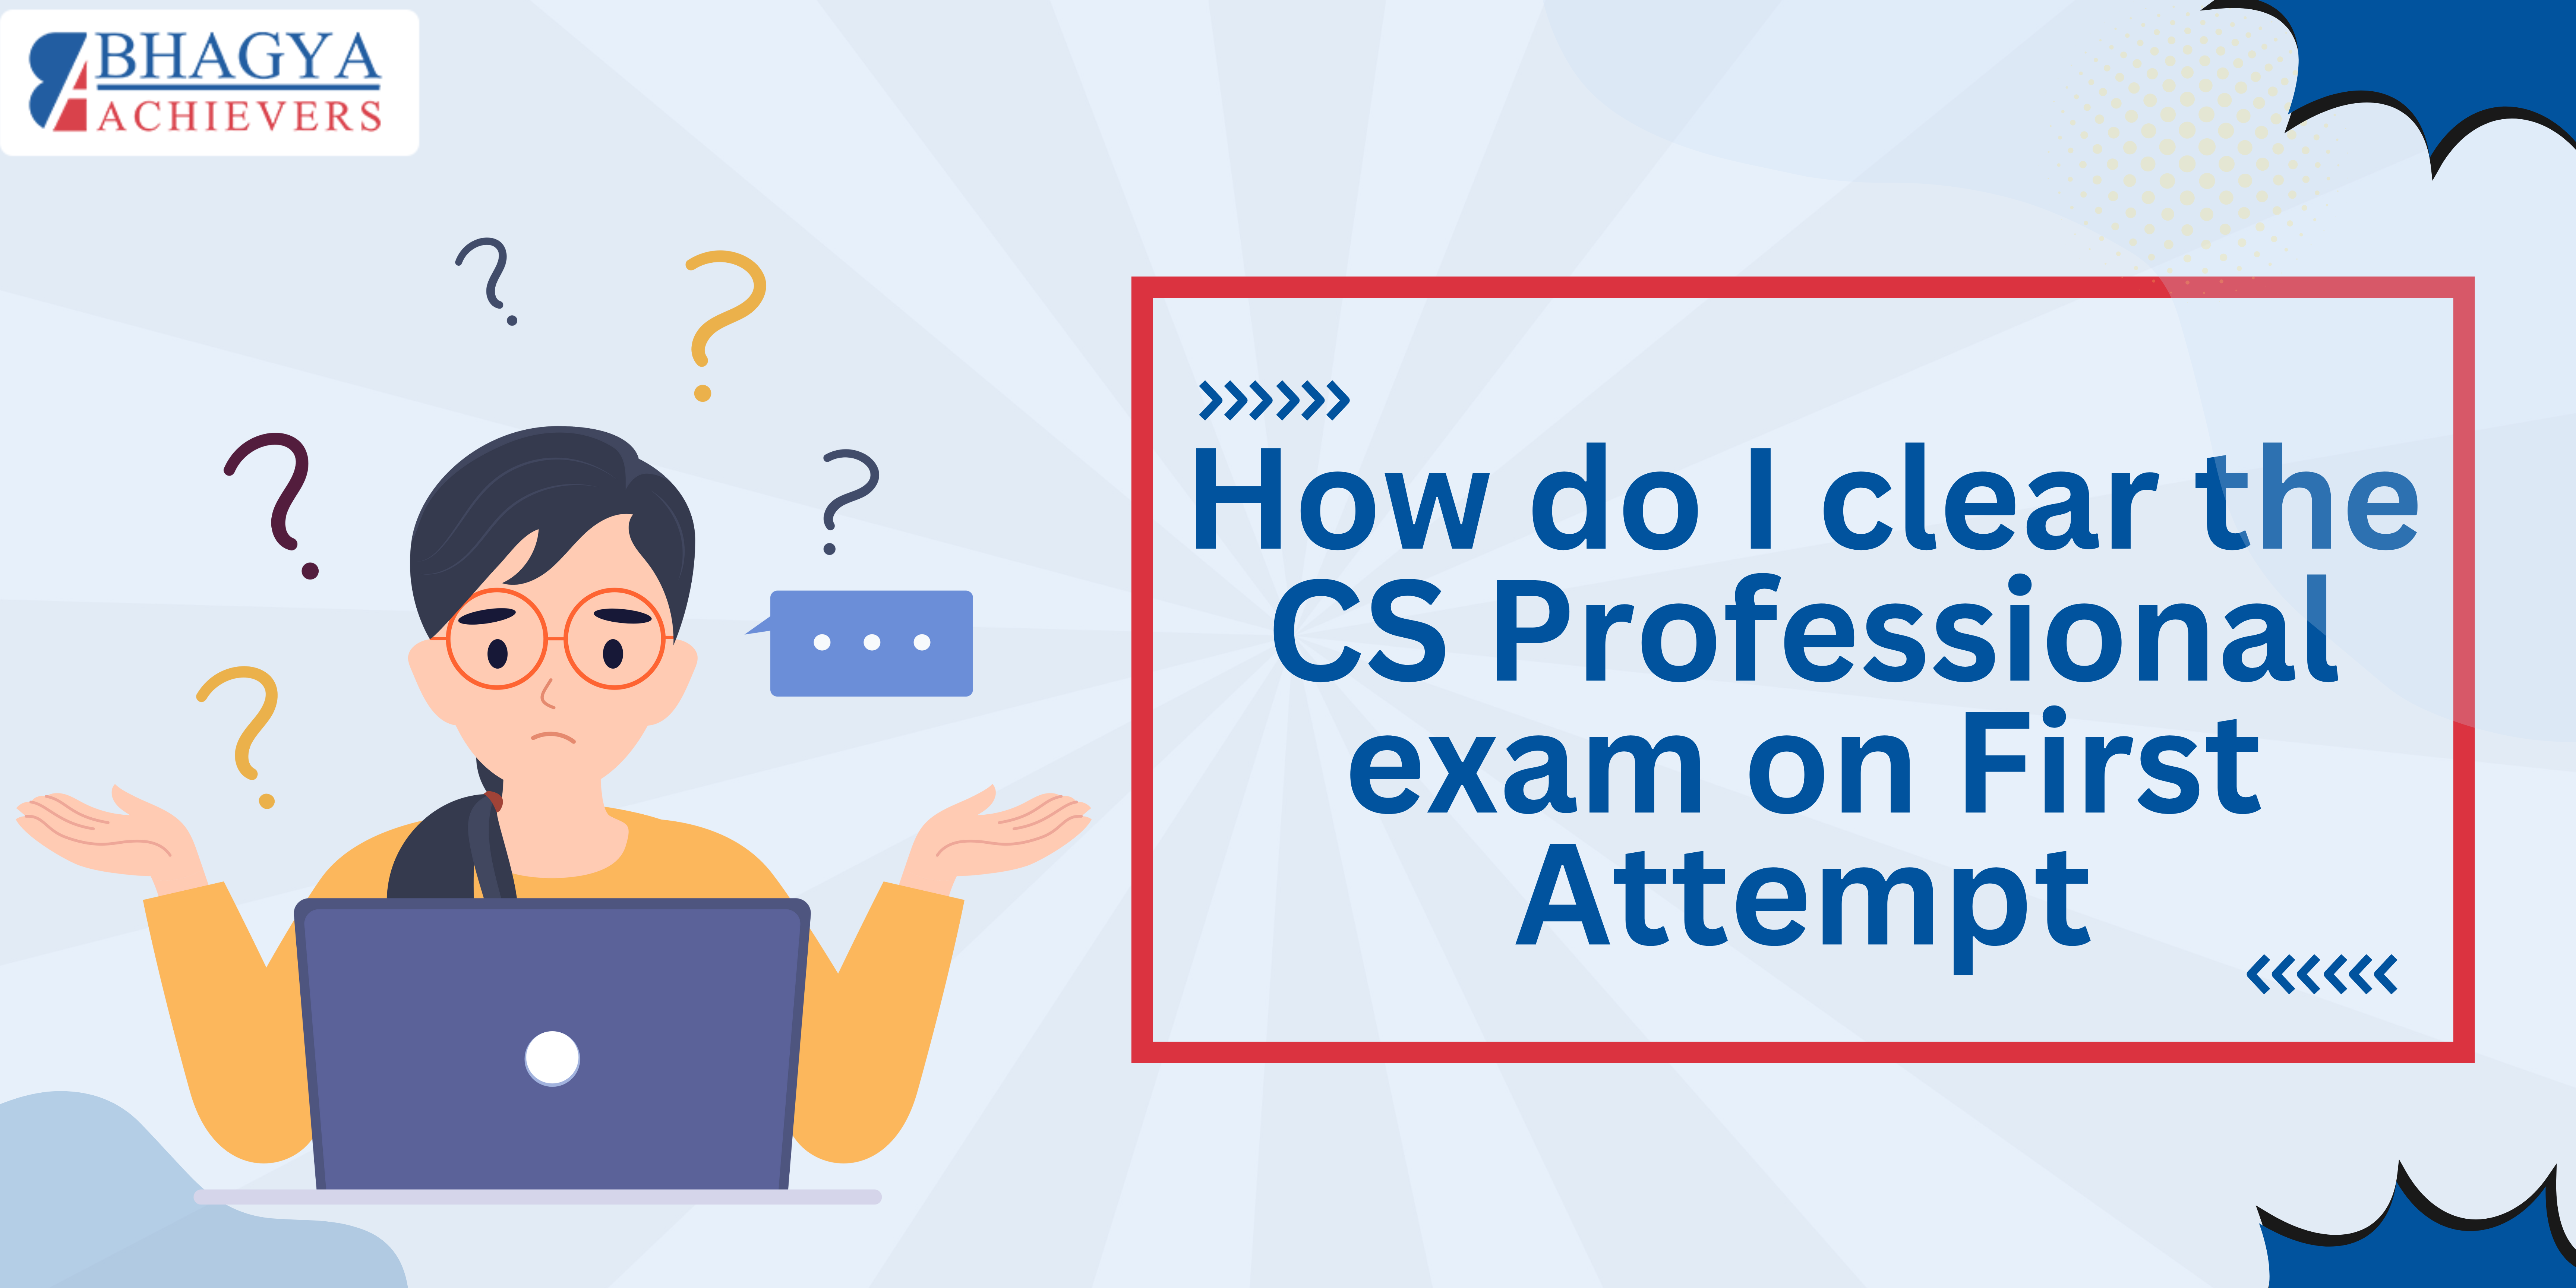 How do I clear the CS Professional exam on First Attempt? - Bhagya Achievers